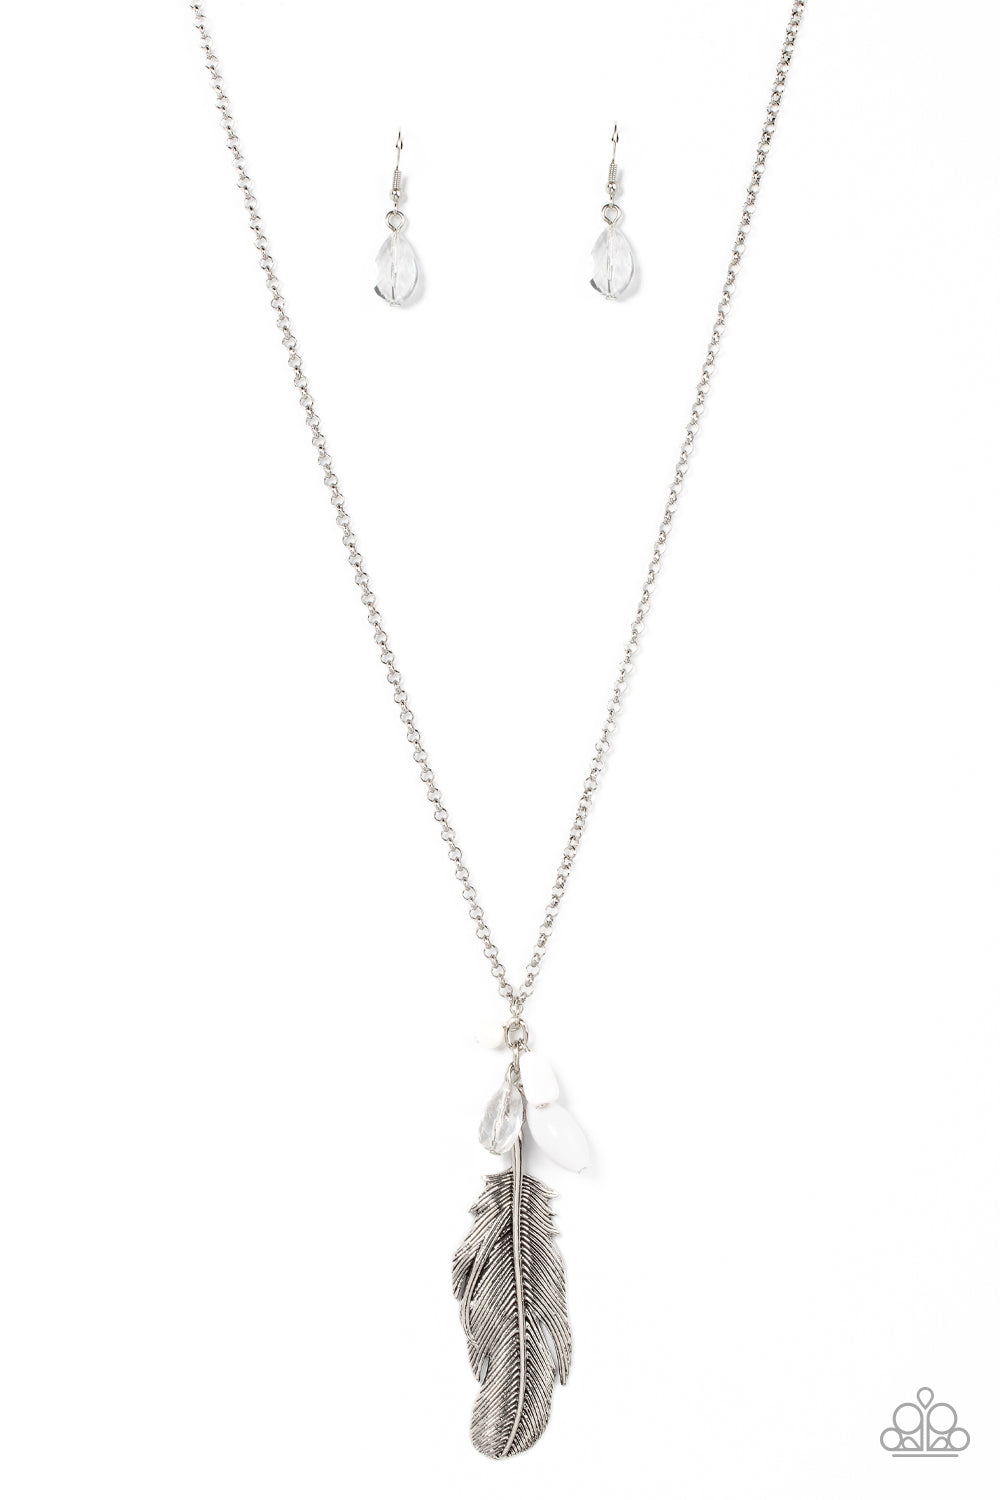 Off the FLOCK - White Beads & Oversized Silver Feather Pendant Paparazzi Necklace & matching earrings